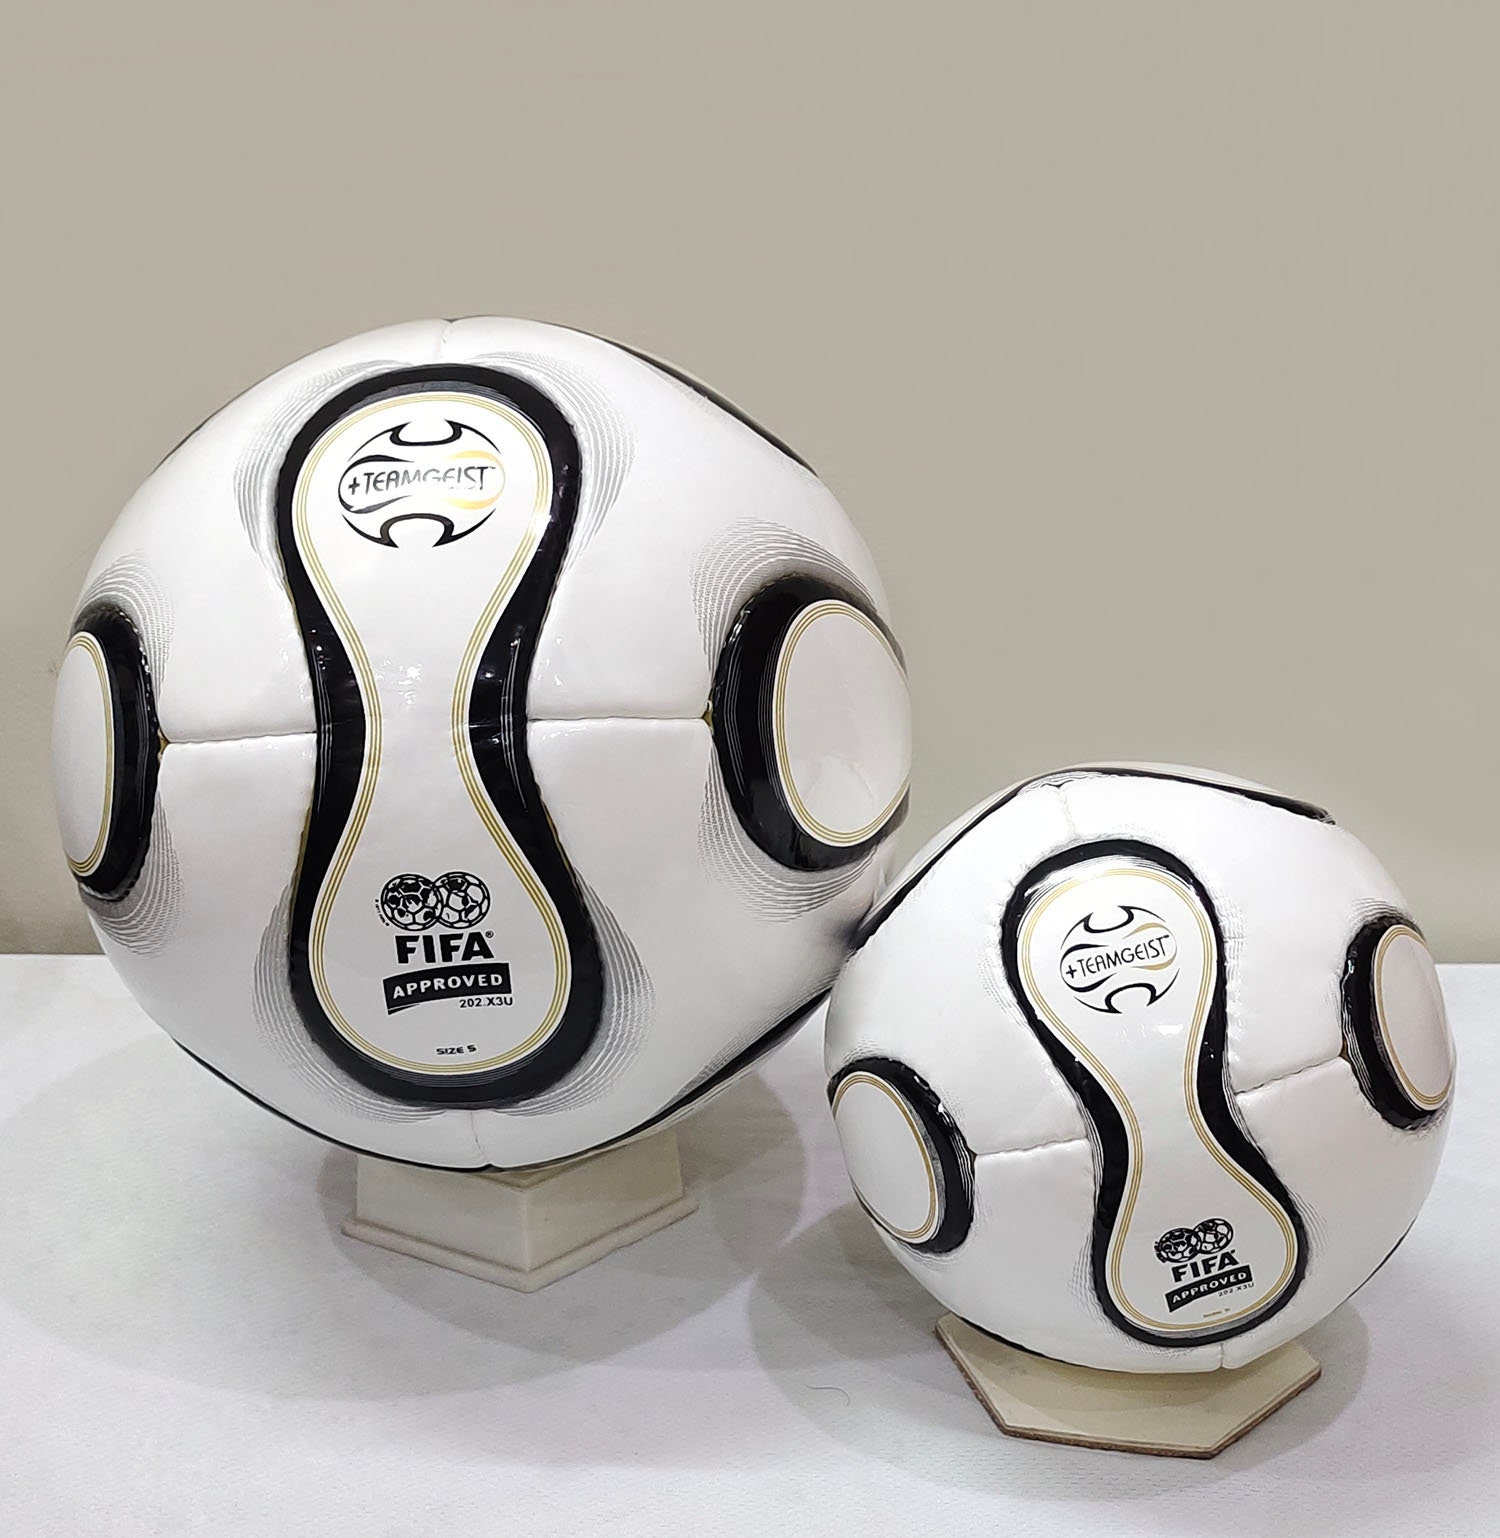 Teamgeist Pack of 2 Balls World Cup Soccer Ball 2006 Germany - Etsy